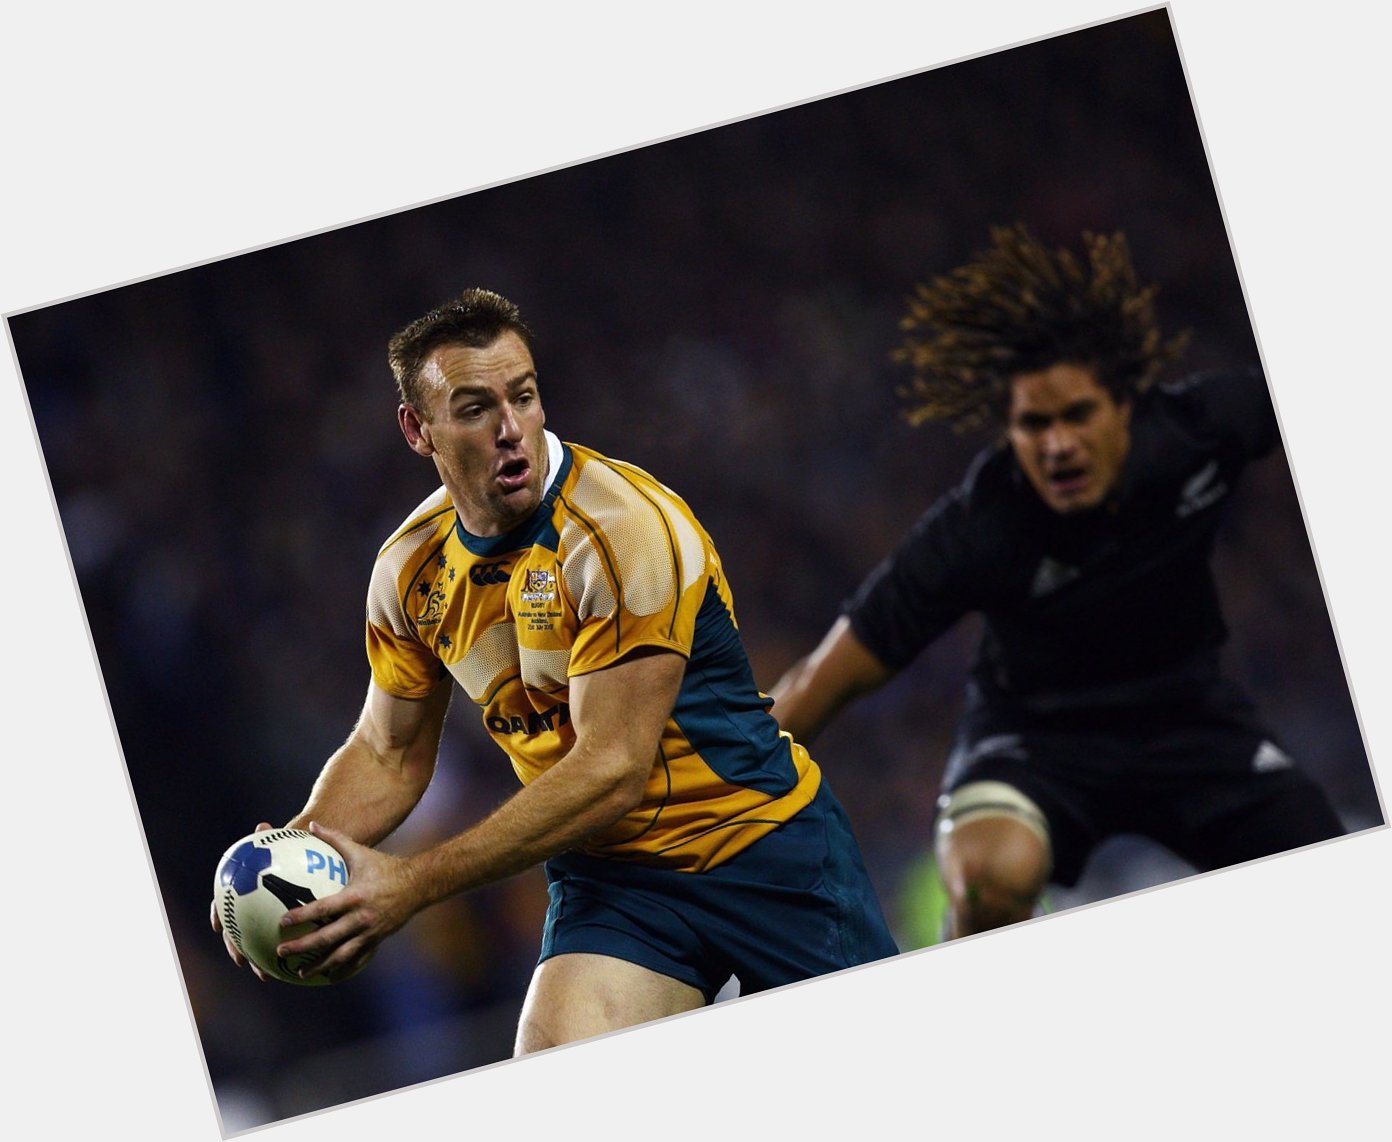 Happy birthday to Wallaby No. 749 Chris Latham, who made his Test debut vs. France in 1998! 